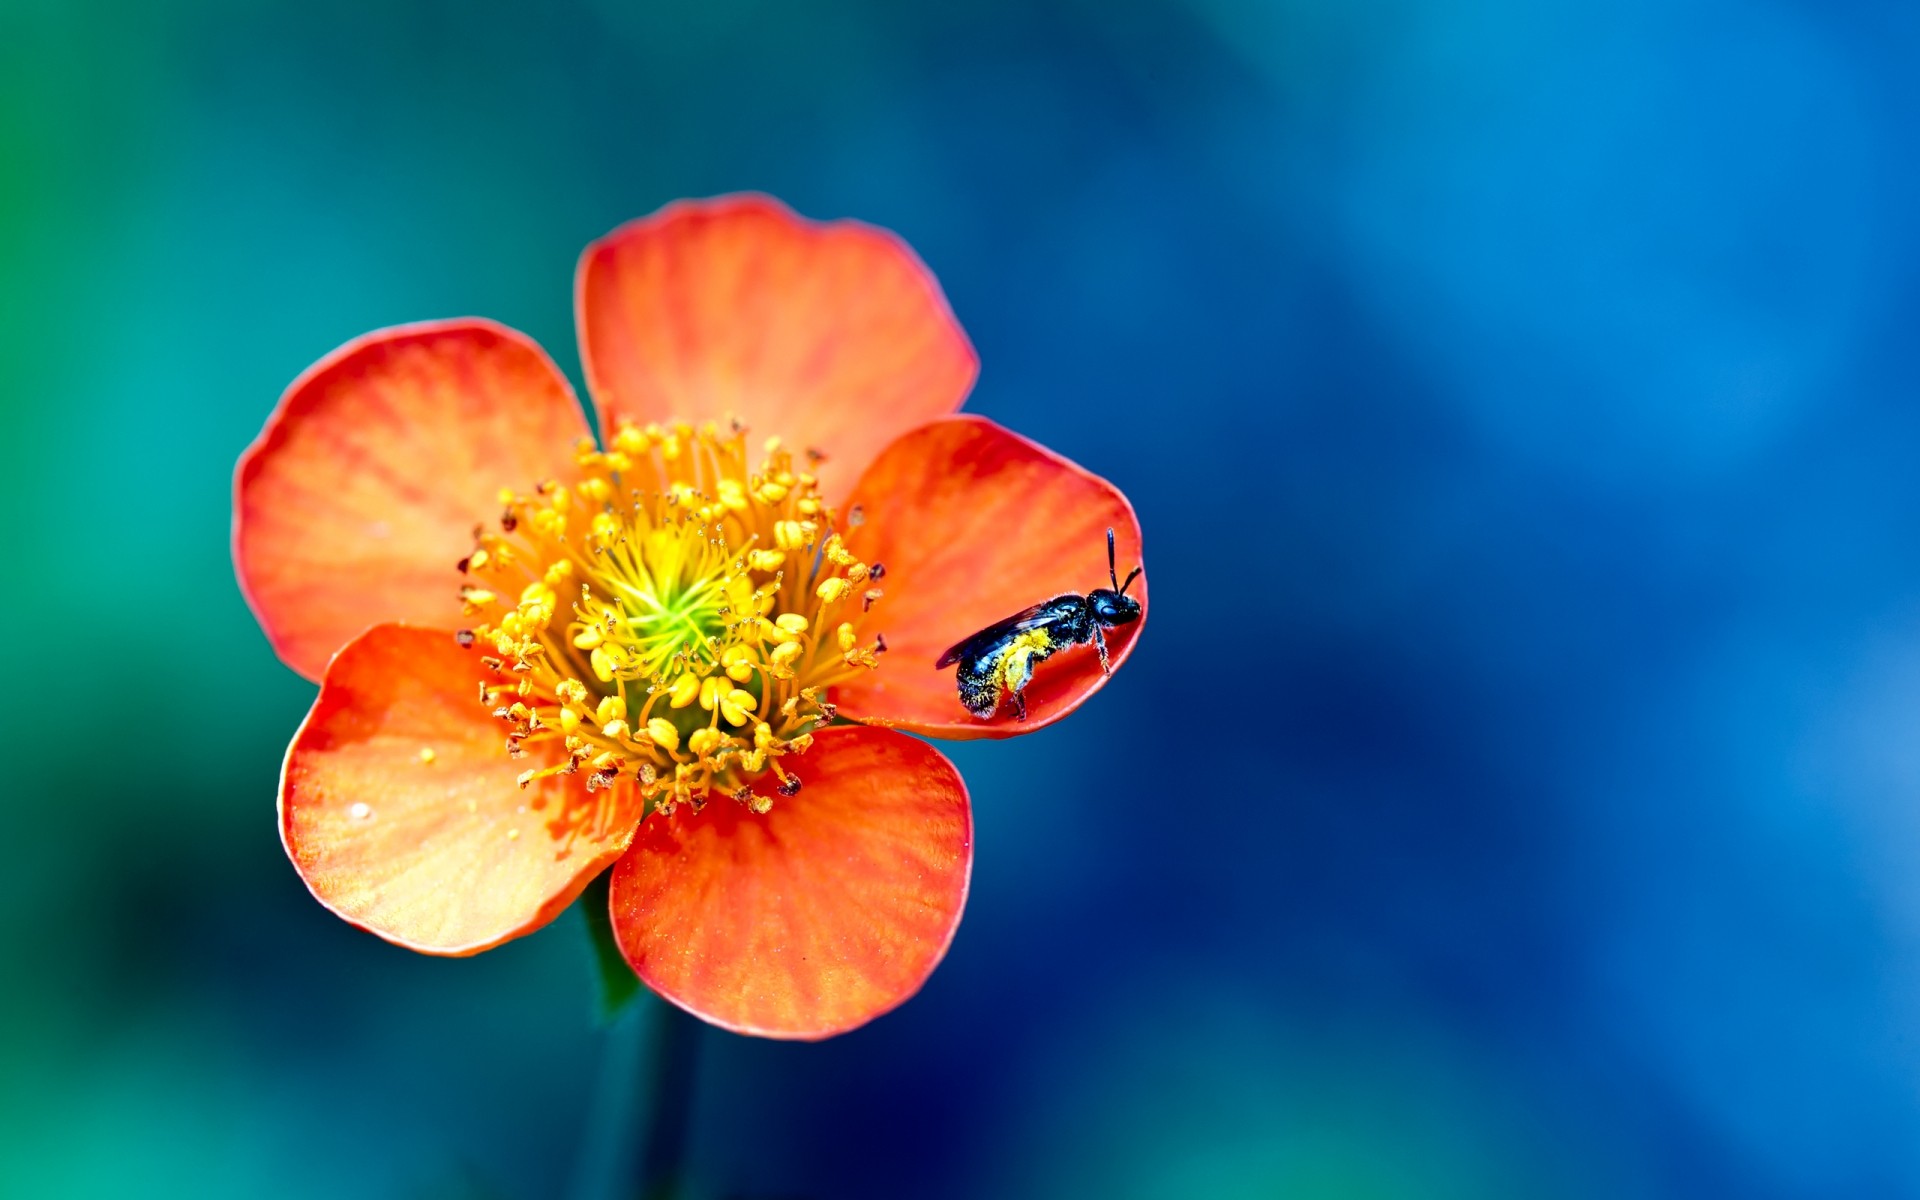 insects nature outdoors flower summer blur bright leaf wasp insect petals colors